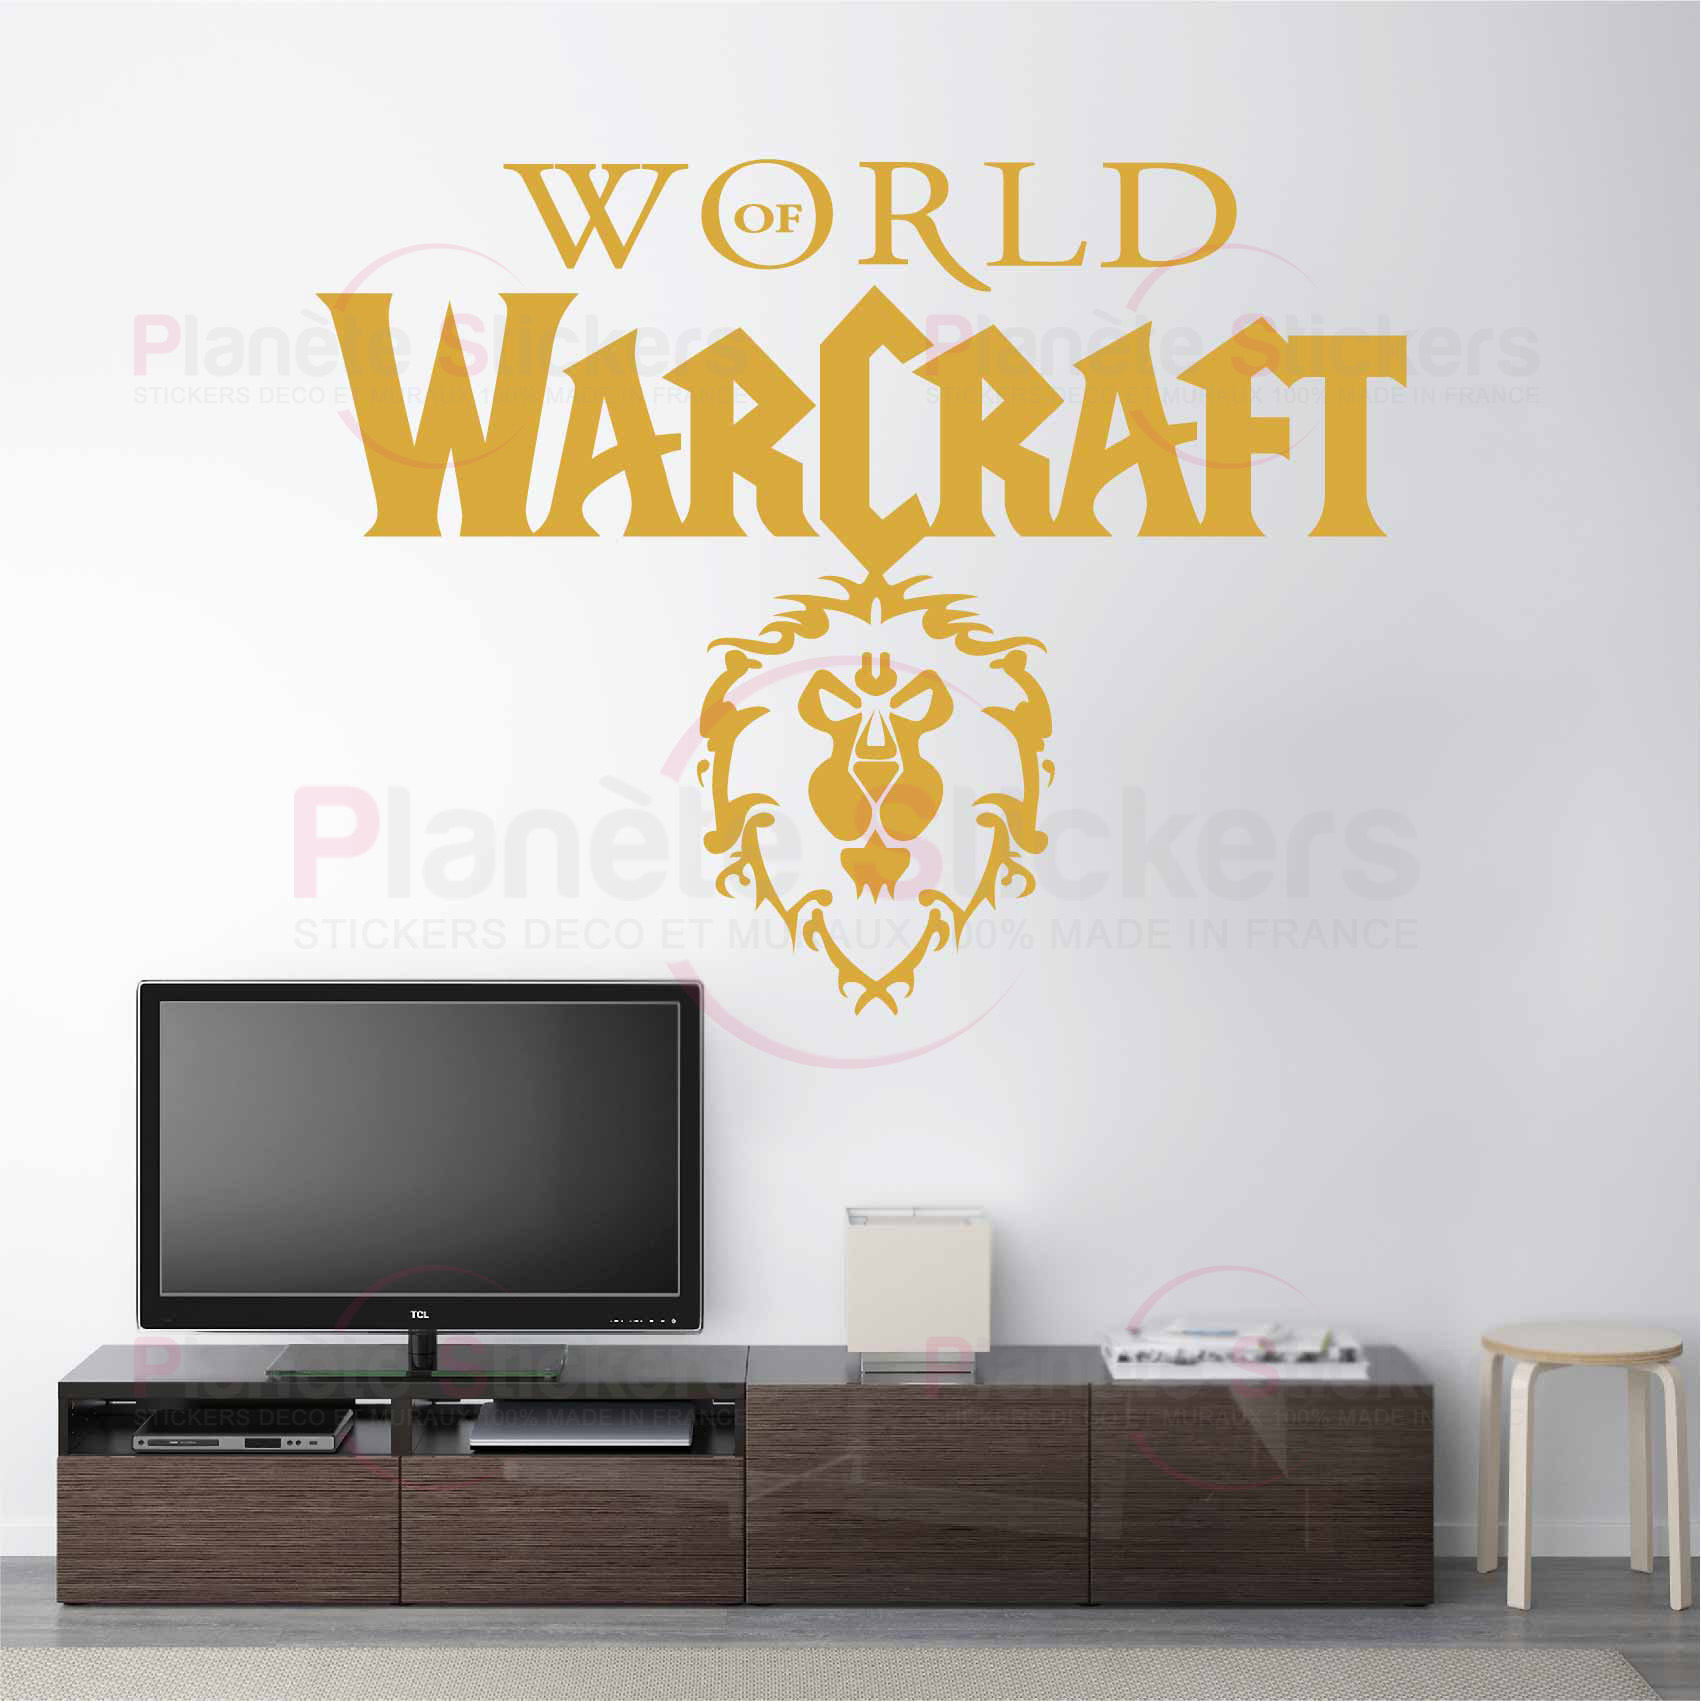 stickers-alliance-wow-ref6wow-stickers-muraux-world-of-warcraft-autocollant-mural-jeux-video-sticker-gamer-deco-gaming-salon-chambre